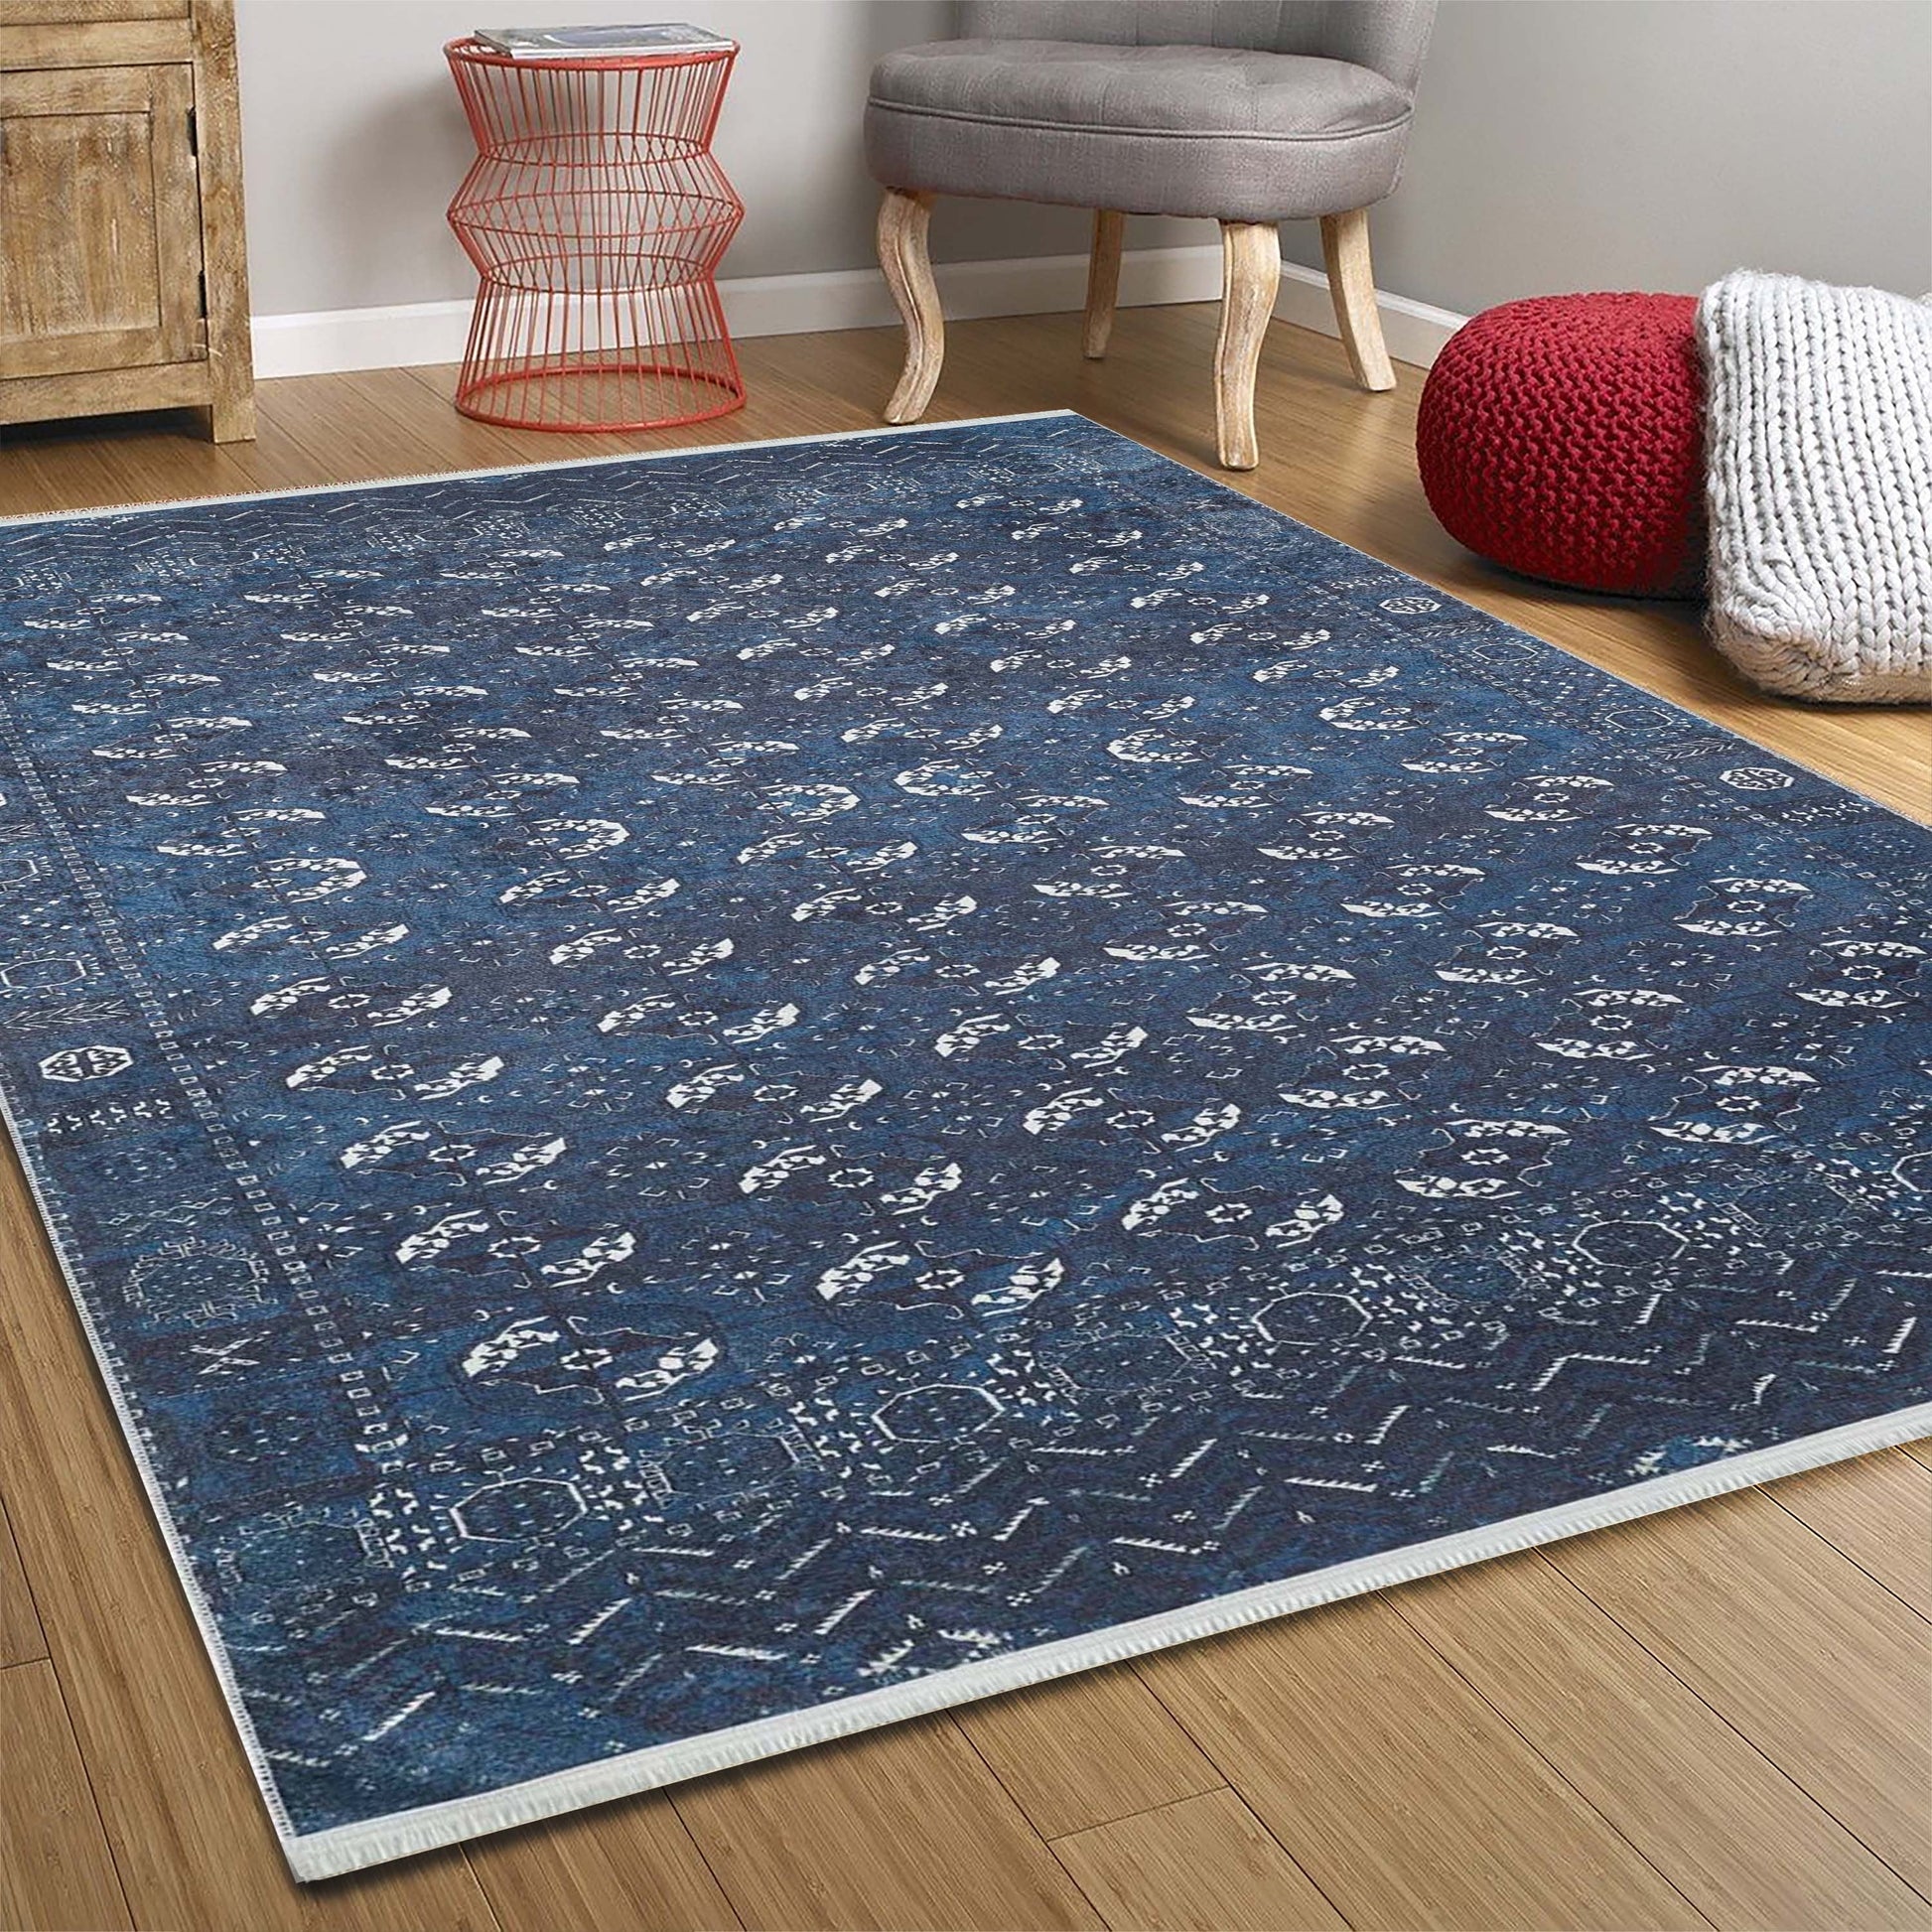 2x3 Navy Blue Afghan Rug, Small Area Rugs 3x5 4x6 Traditional Vintage Oriental Tapis Gift for Mom Kitchen Bathroom Bedside Entryway Laundry - famerugs